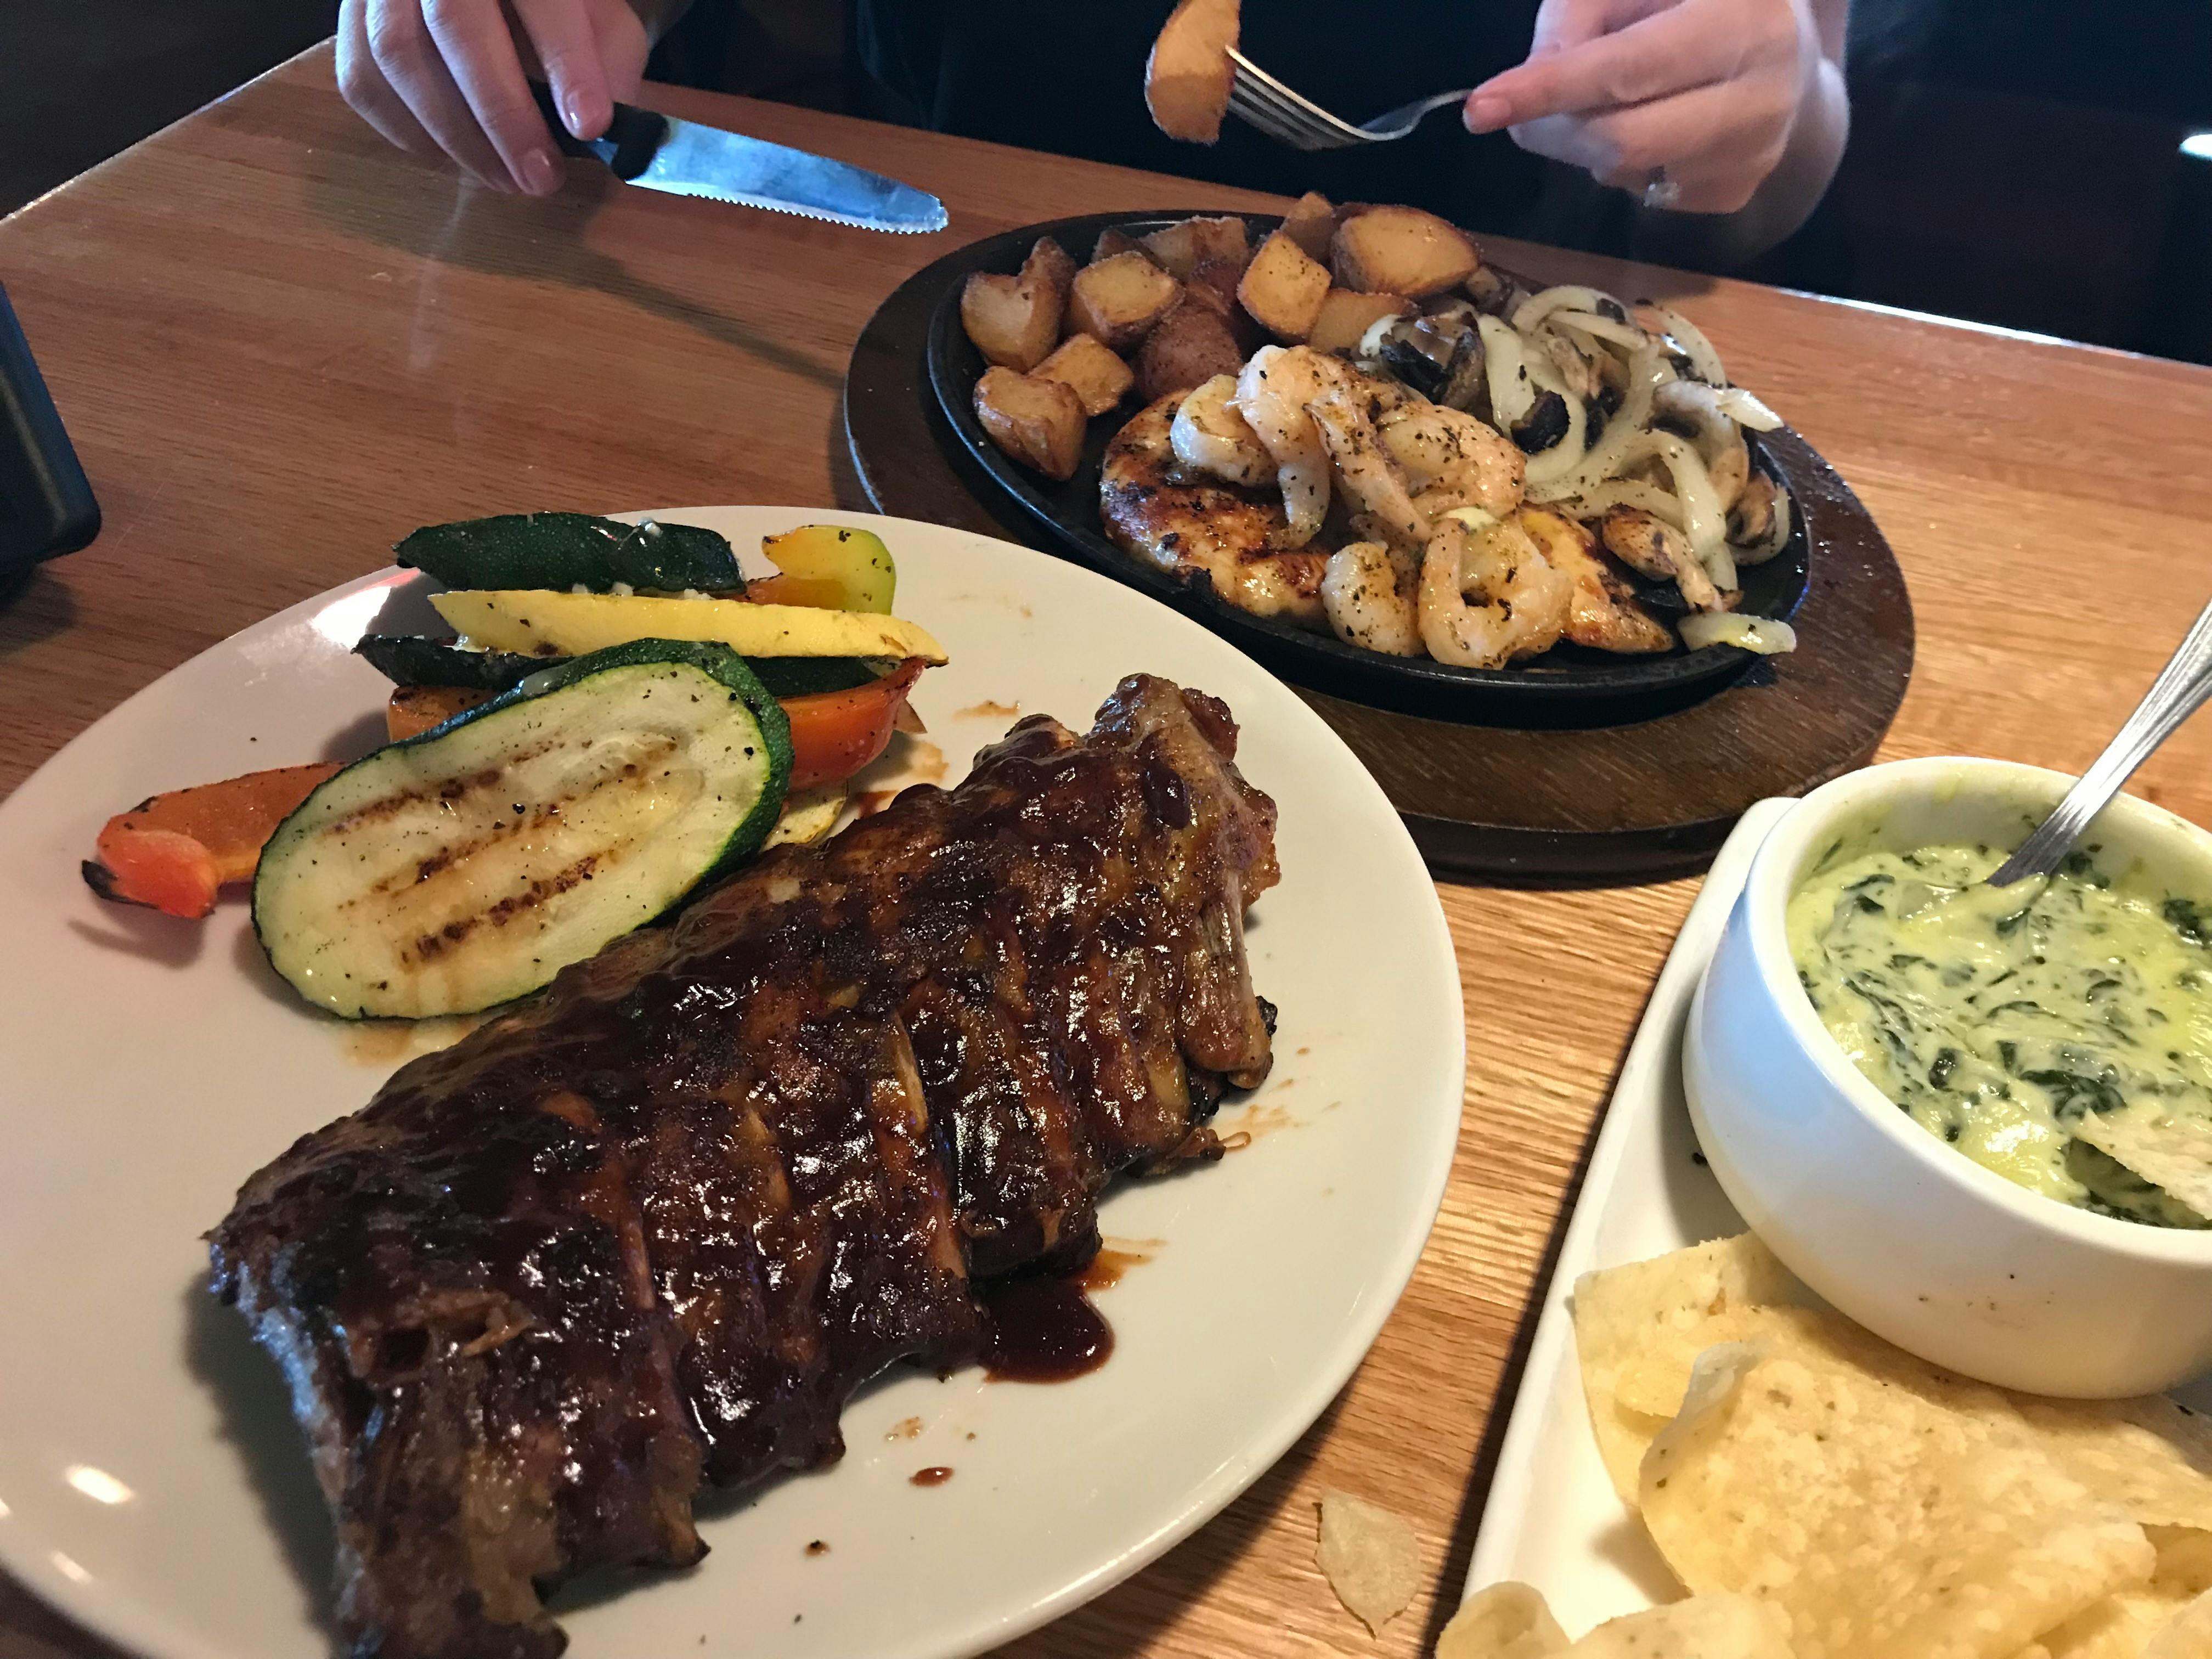 A plate of ribs and vegetables on a table next to a skillet plate of shrimp, chicken, potatoes, and onions, and another plate with a bowl of spinach-artichoke dip and tortilla chips on a table at Applebee's.